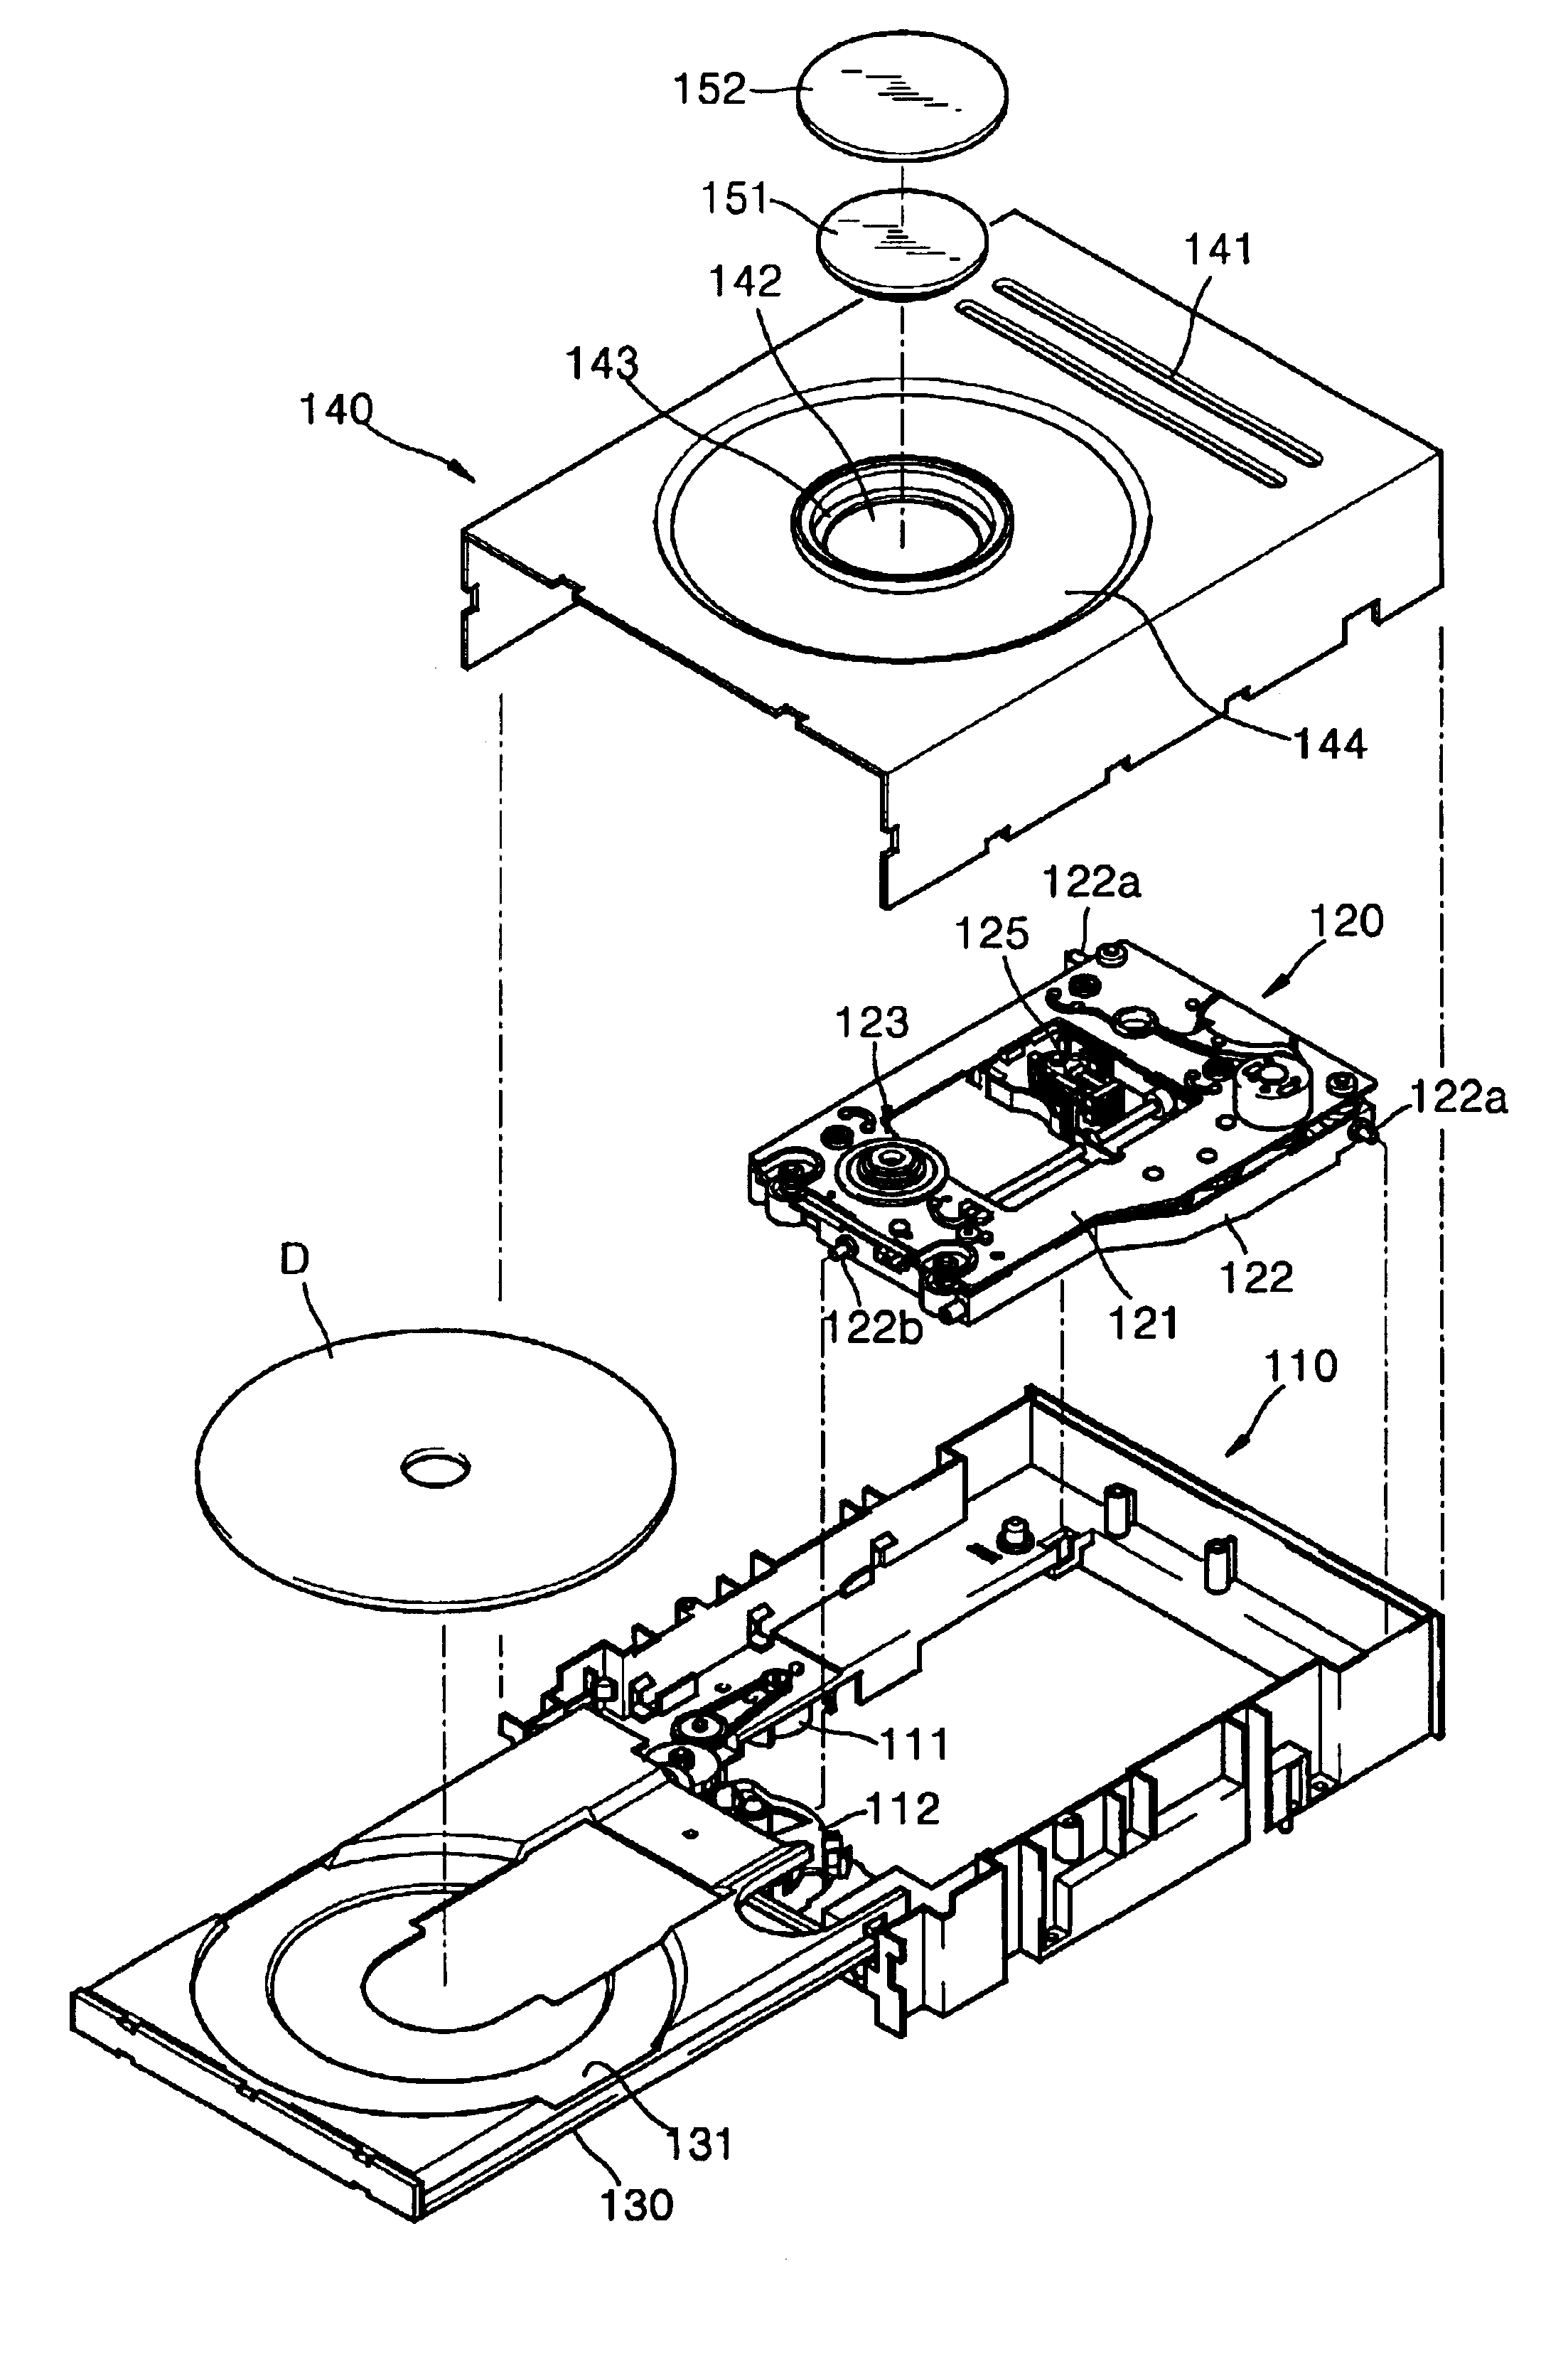 Cover plate for optical disk drive